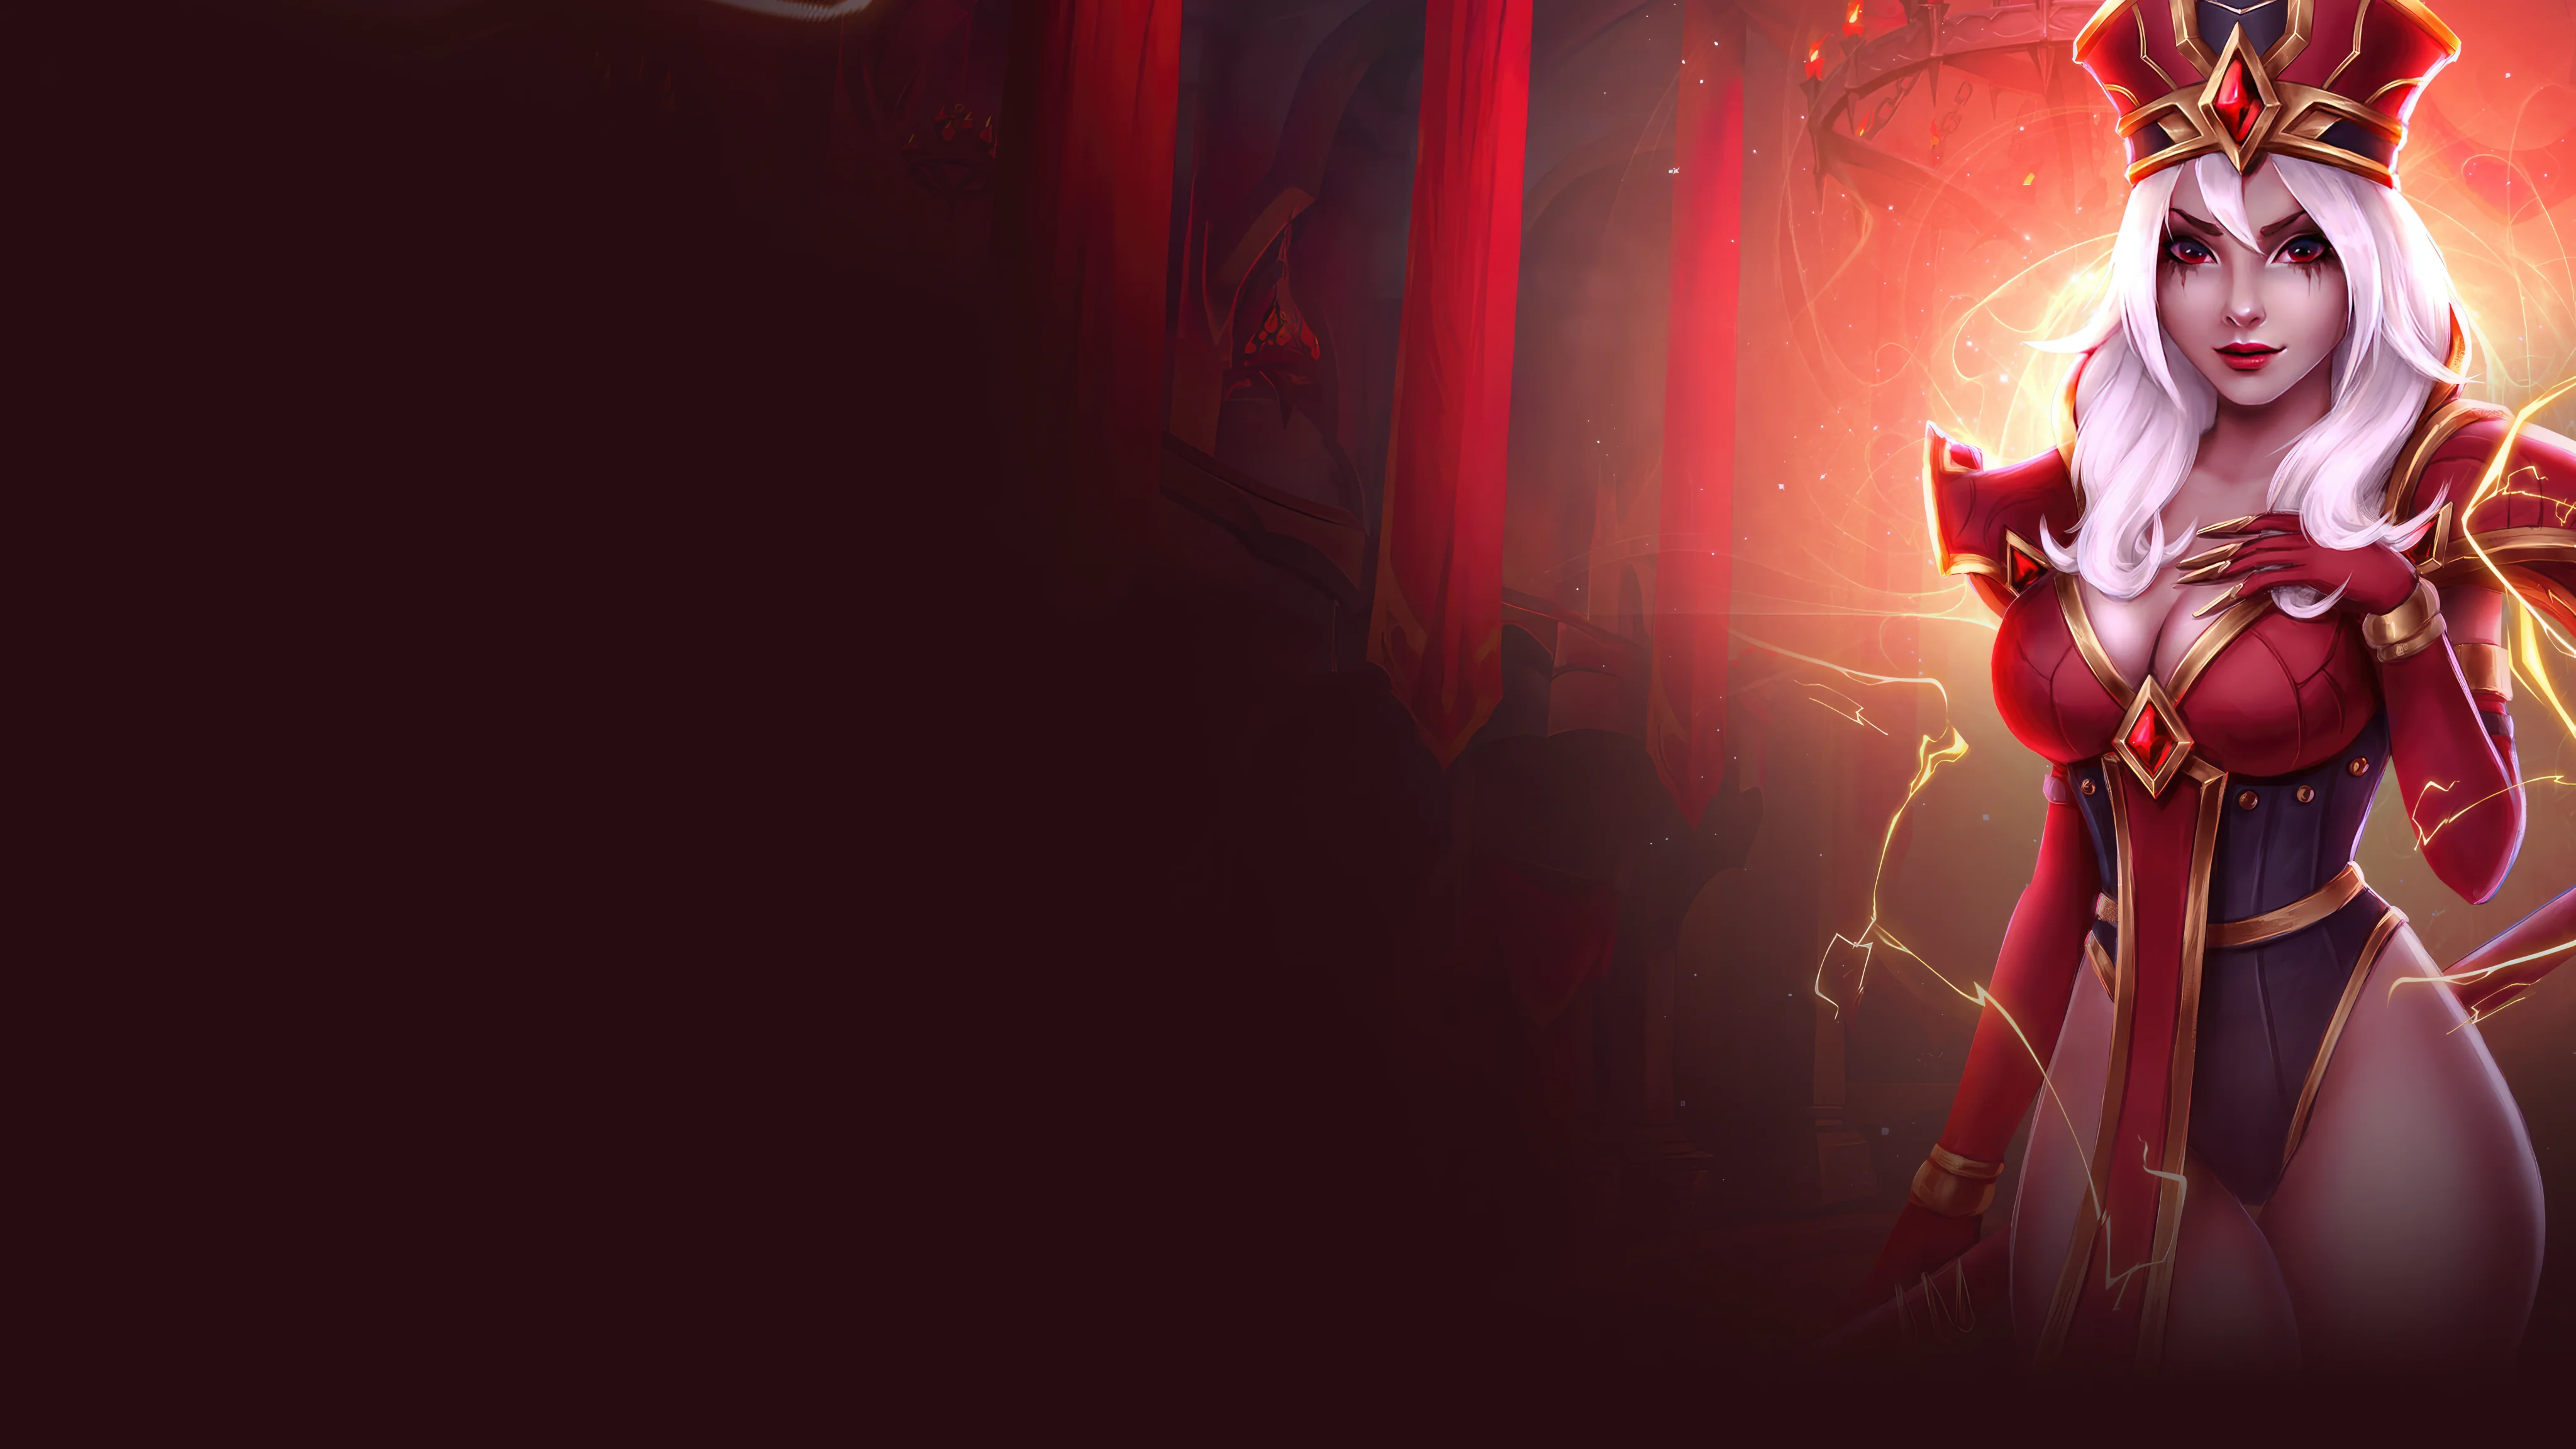 Start your adventure on Whitemane. Learn how to play for free, choose your realm, create an account, download the game, and dive in!